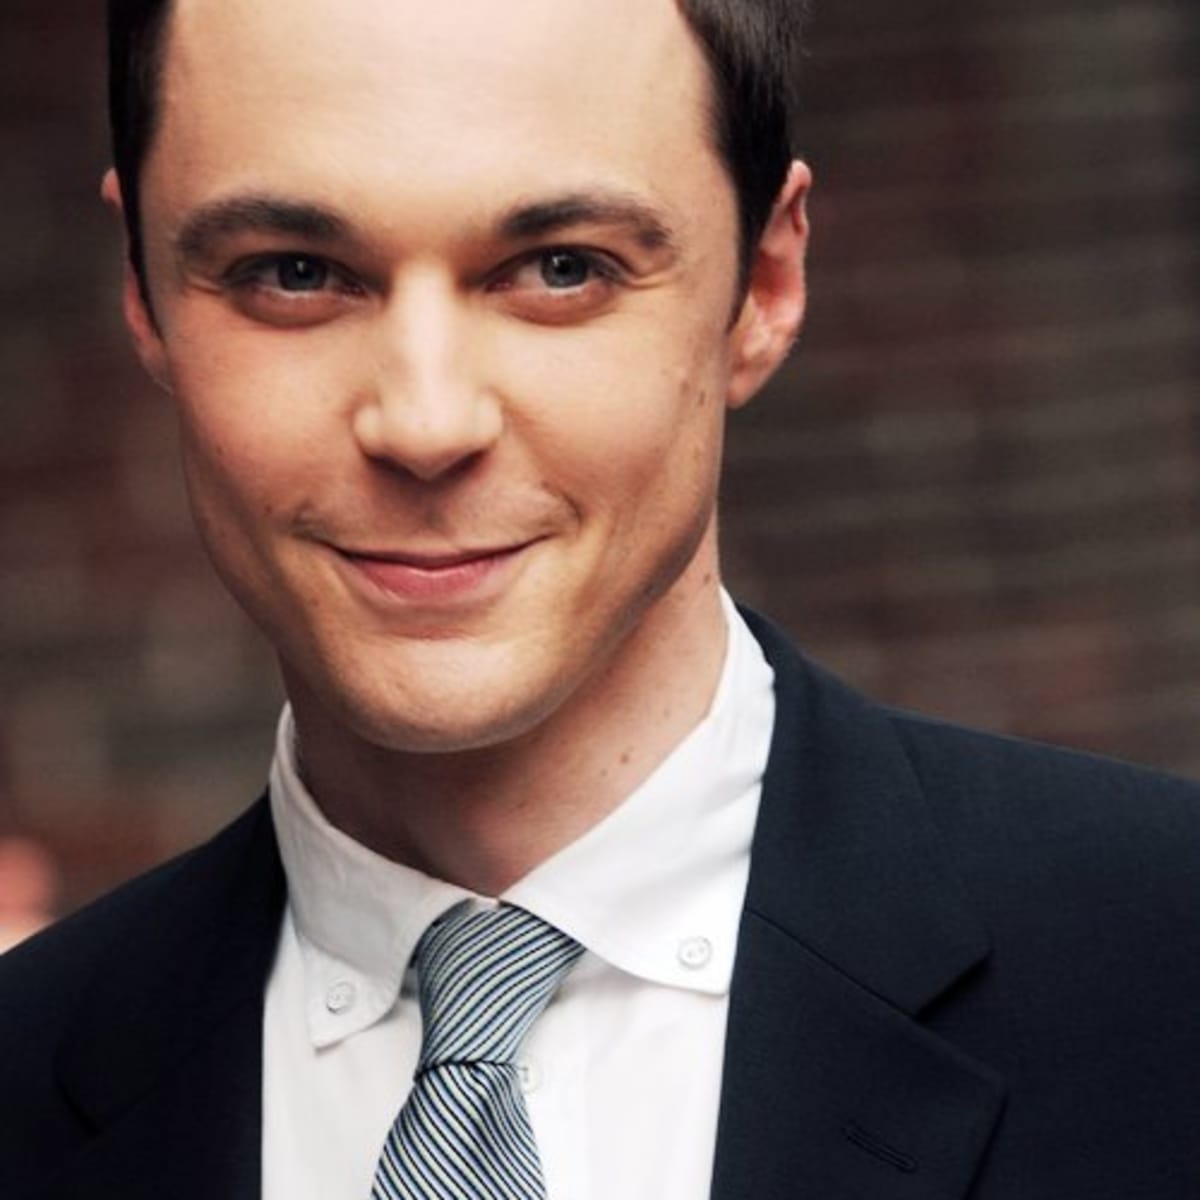 Sheldon Cooper from The Big Theory: Jim Parsons facts, and some idiosyncrasies - HubPages